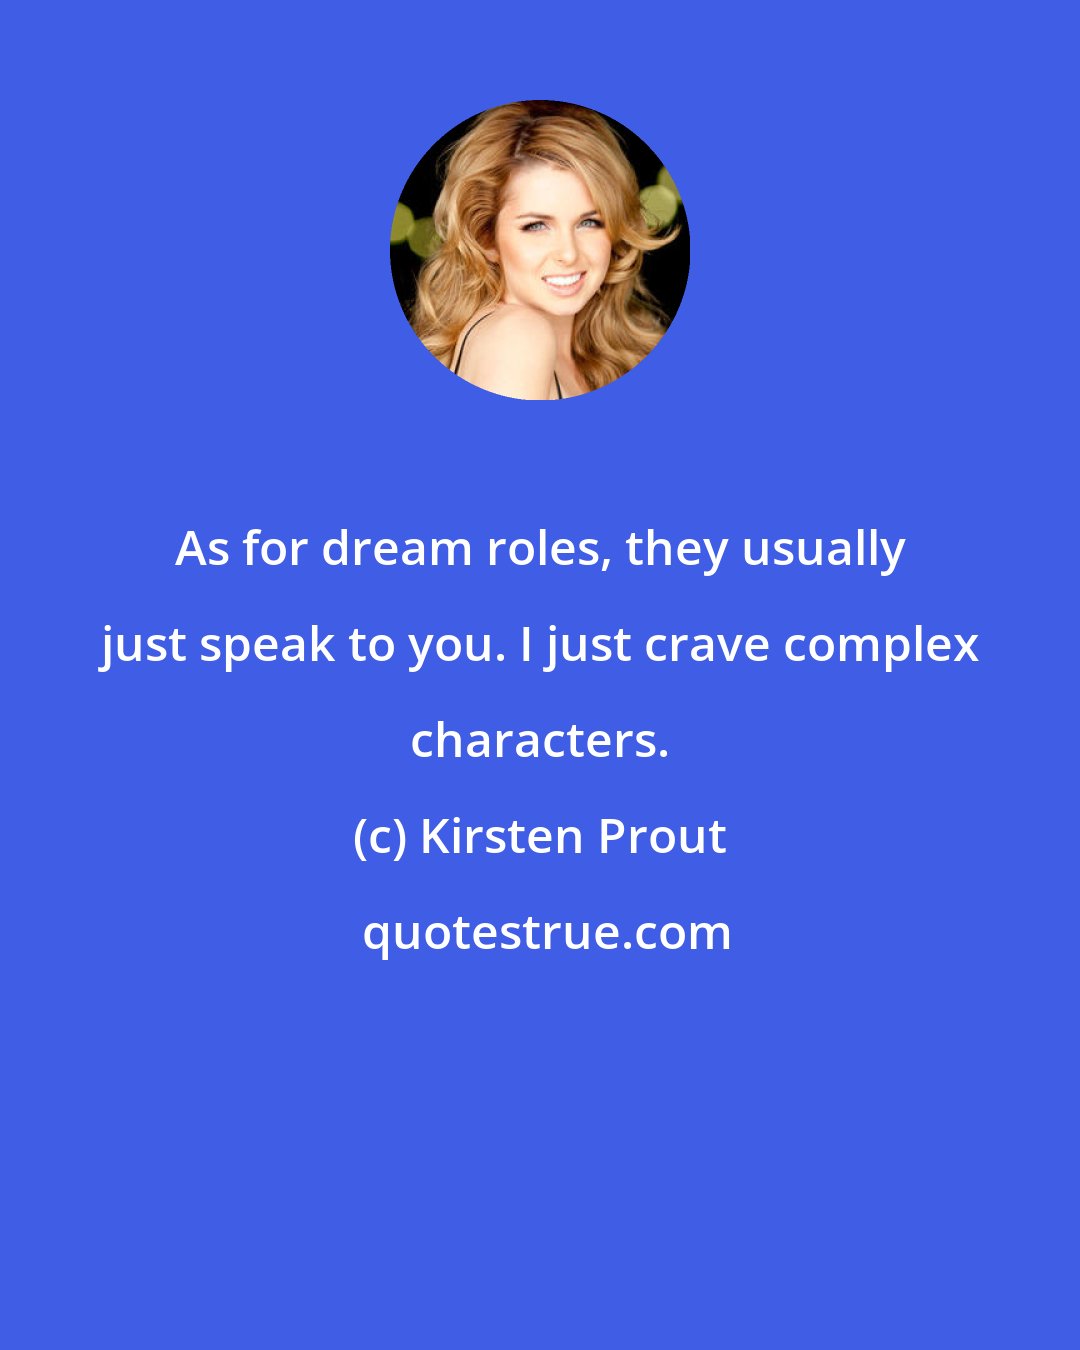 Kirsten Prout: As for dream roles, they usually just speak to you. I just crave complex characters.